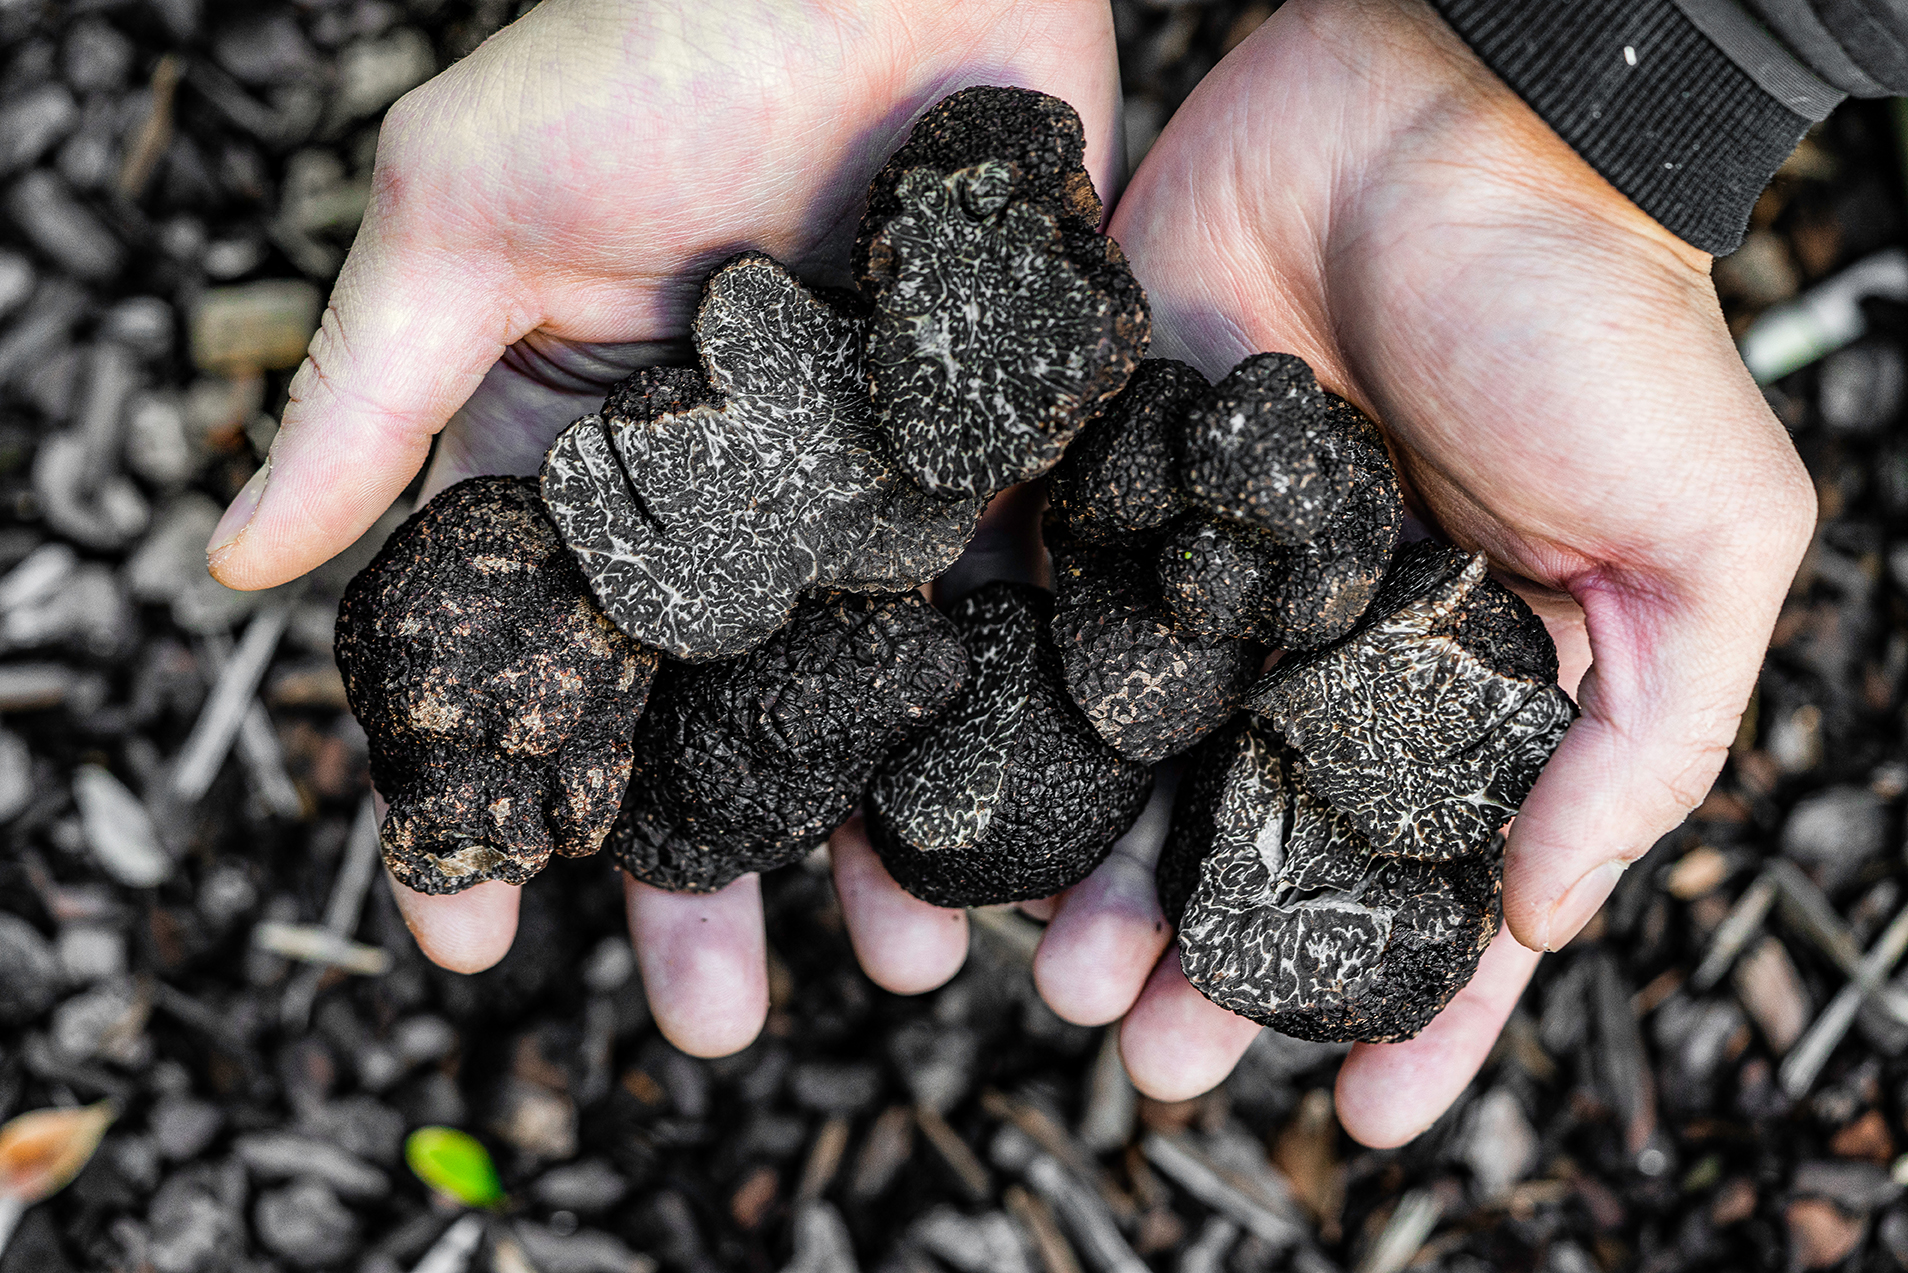 Australian truffle: truffle cultivation for industry expansion